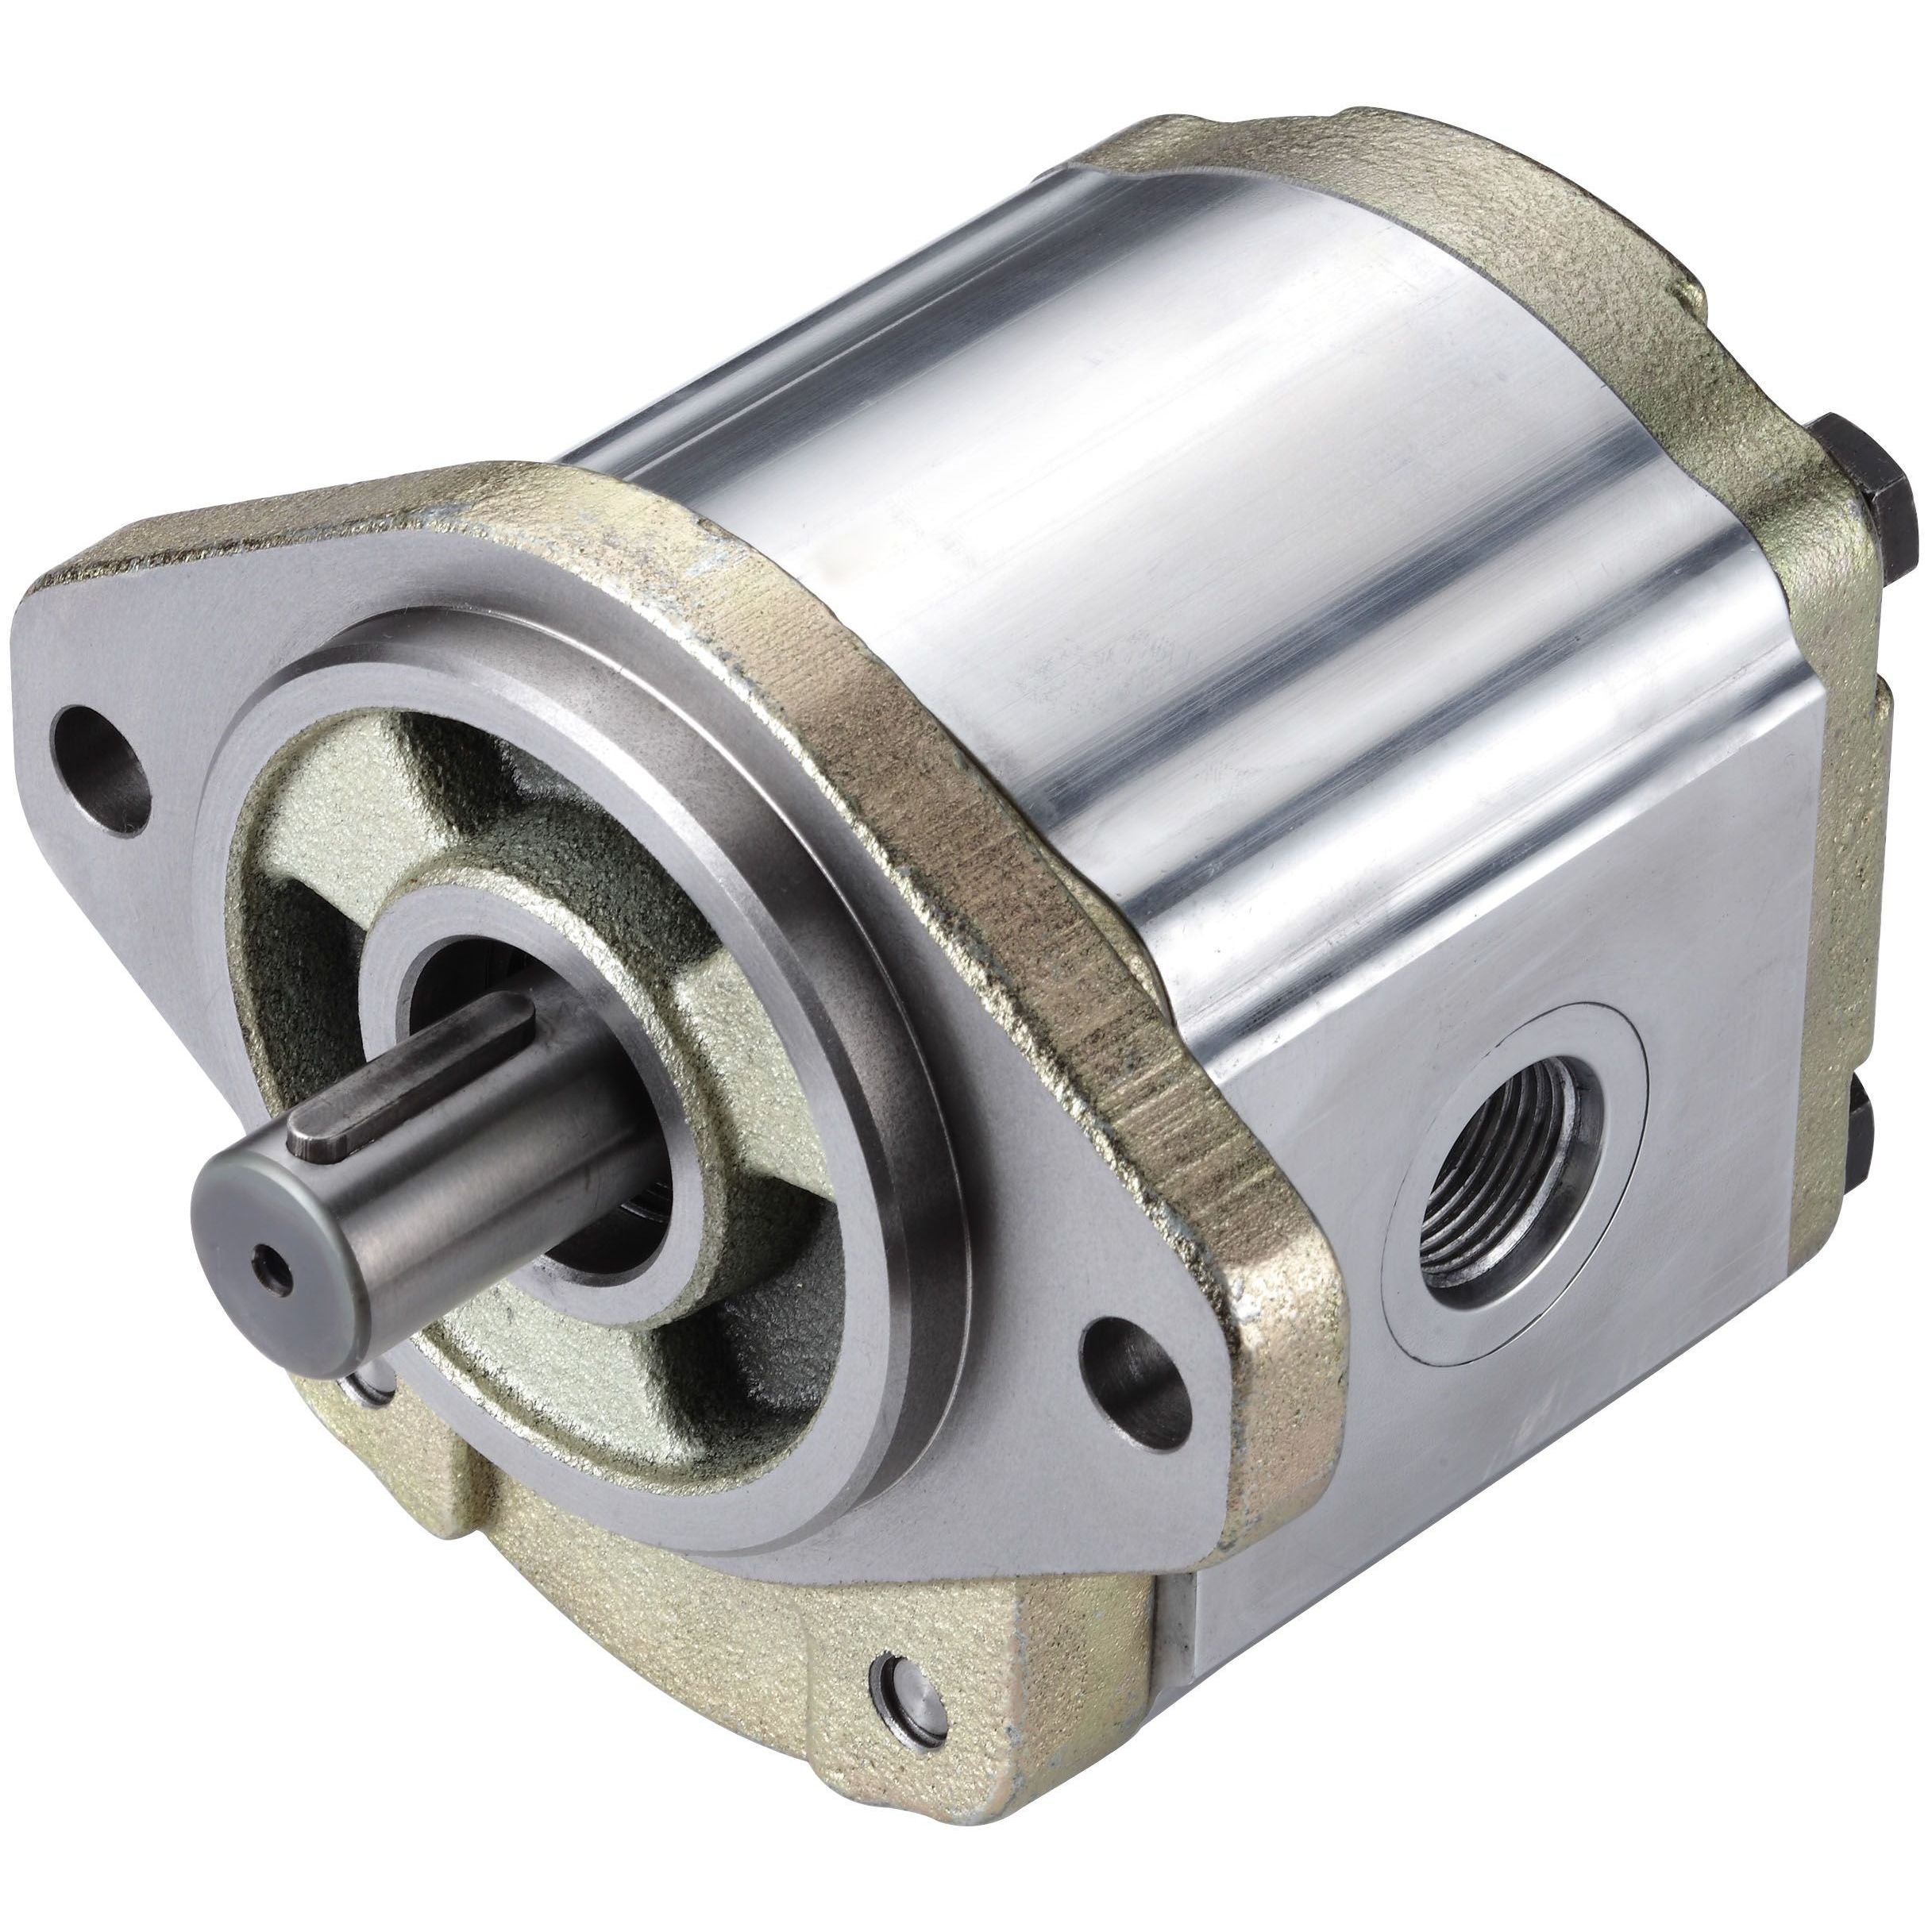 3GB8ZU328L : Honor Gear Pump, CCW Rotation, 28cc (1.71in3), 13.31 GPM, 3500psi, 3000 RPM, #20 SAE (1.25") In, #16 SAE (1") Out, Splined Shaft 13-Tooth, 16/32 Pitch, SAE B 2-Bolt Mount